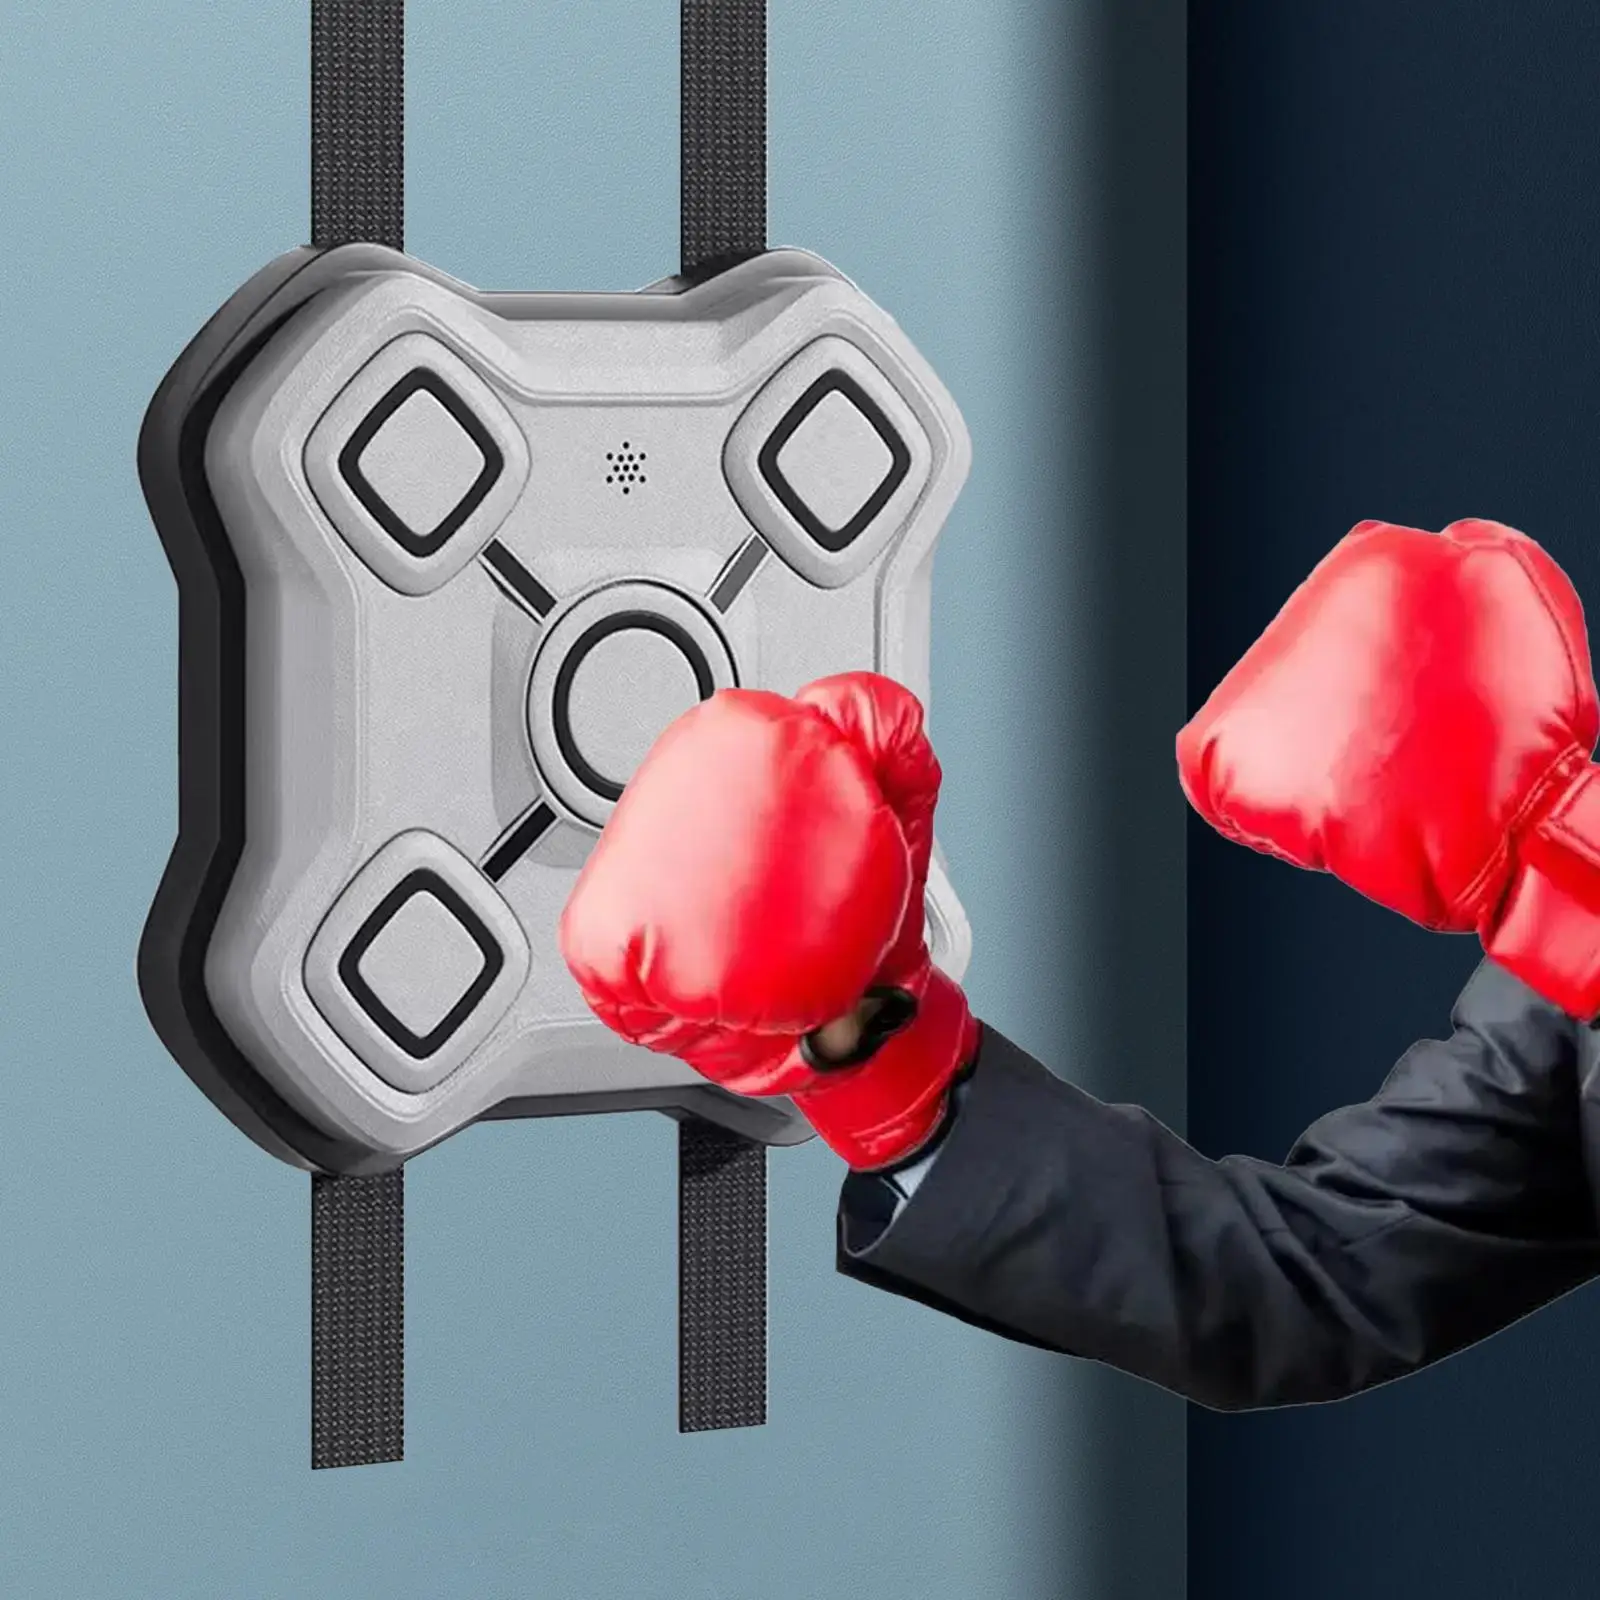 Music Boxing Machine Practice Competitions Sandbag USB Rechargeable Game Striking Skills Target Boxing Trainer Smart